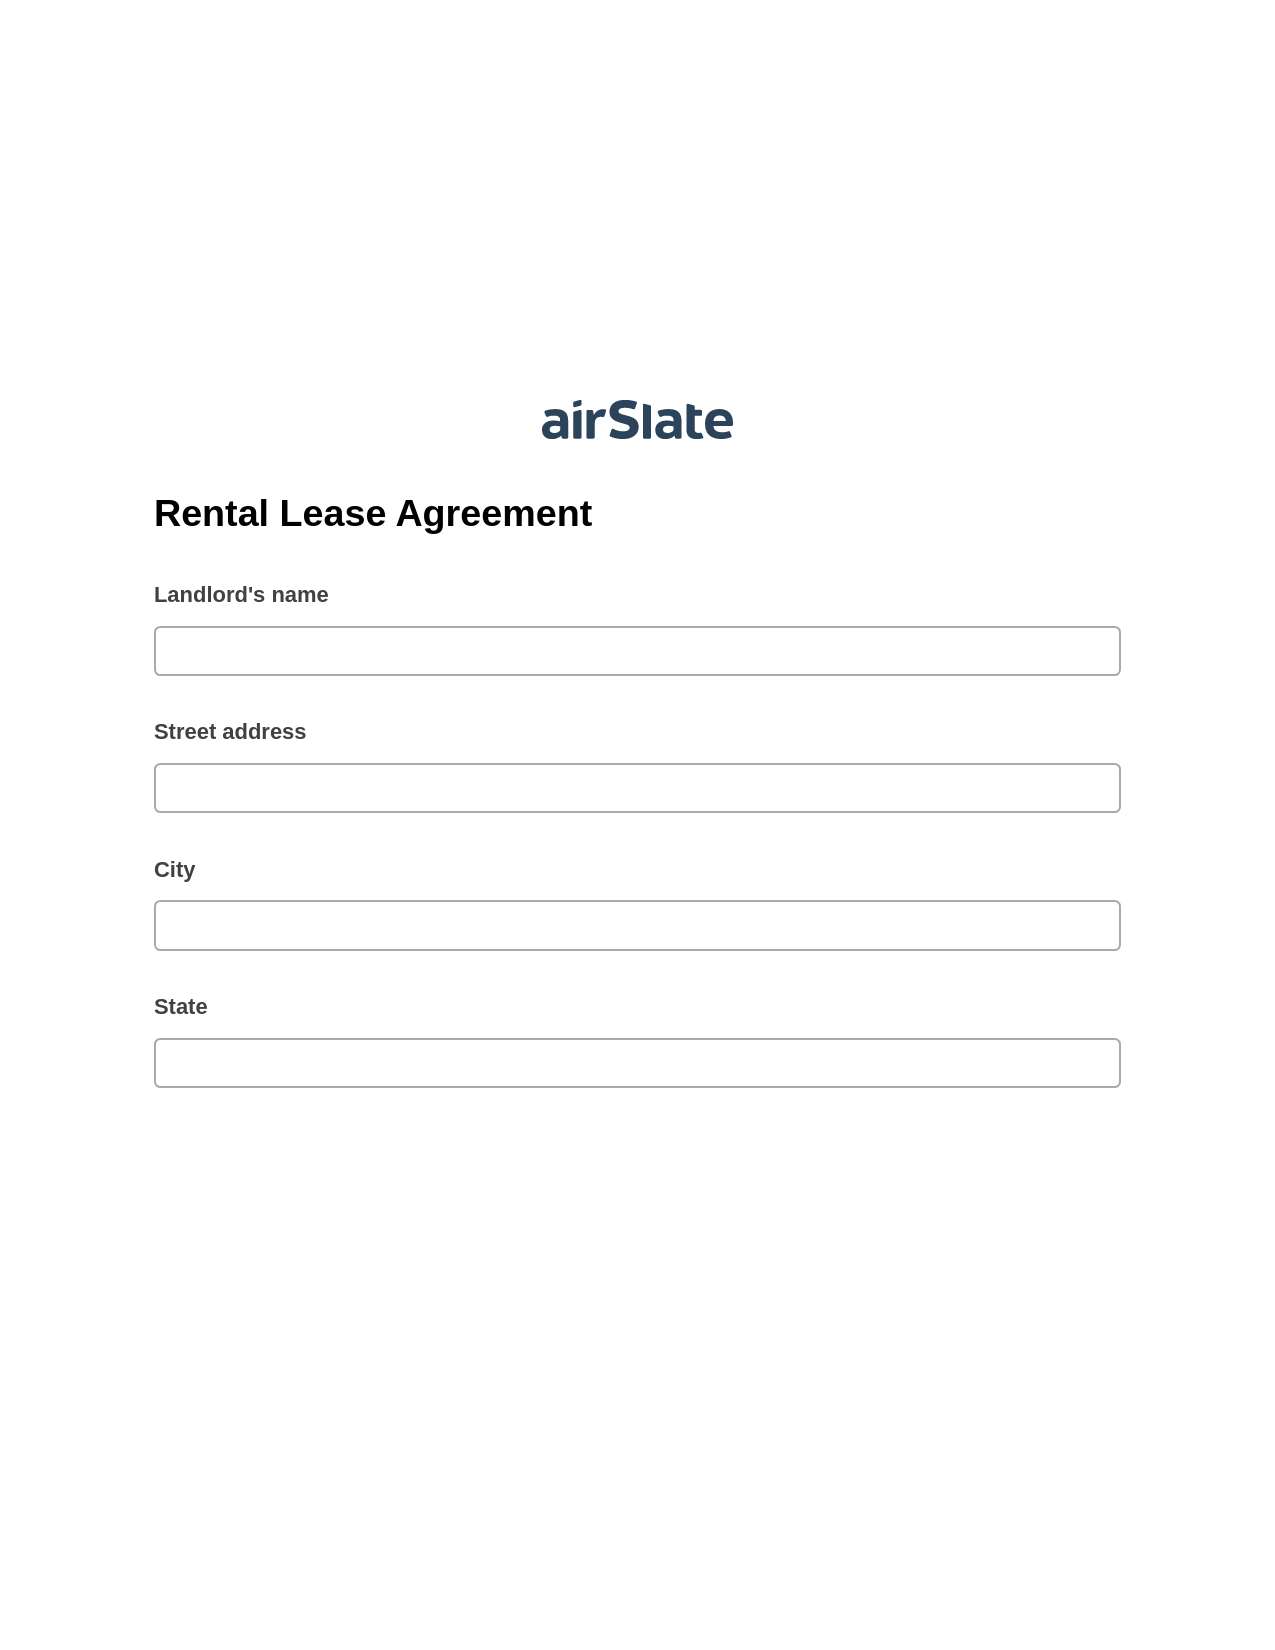 Rental Lease Agreement Pre-fill from CSV File Dropdown Options Bot, Invoke Salesforce Process Bot, Export to Salesforce Bot